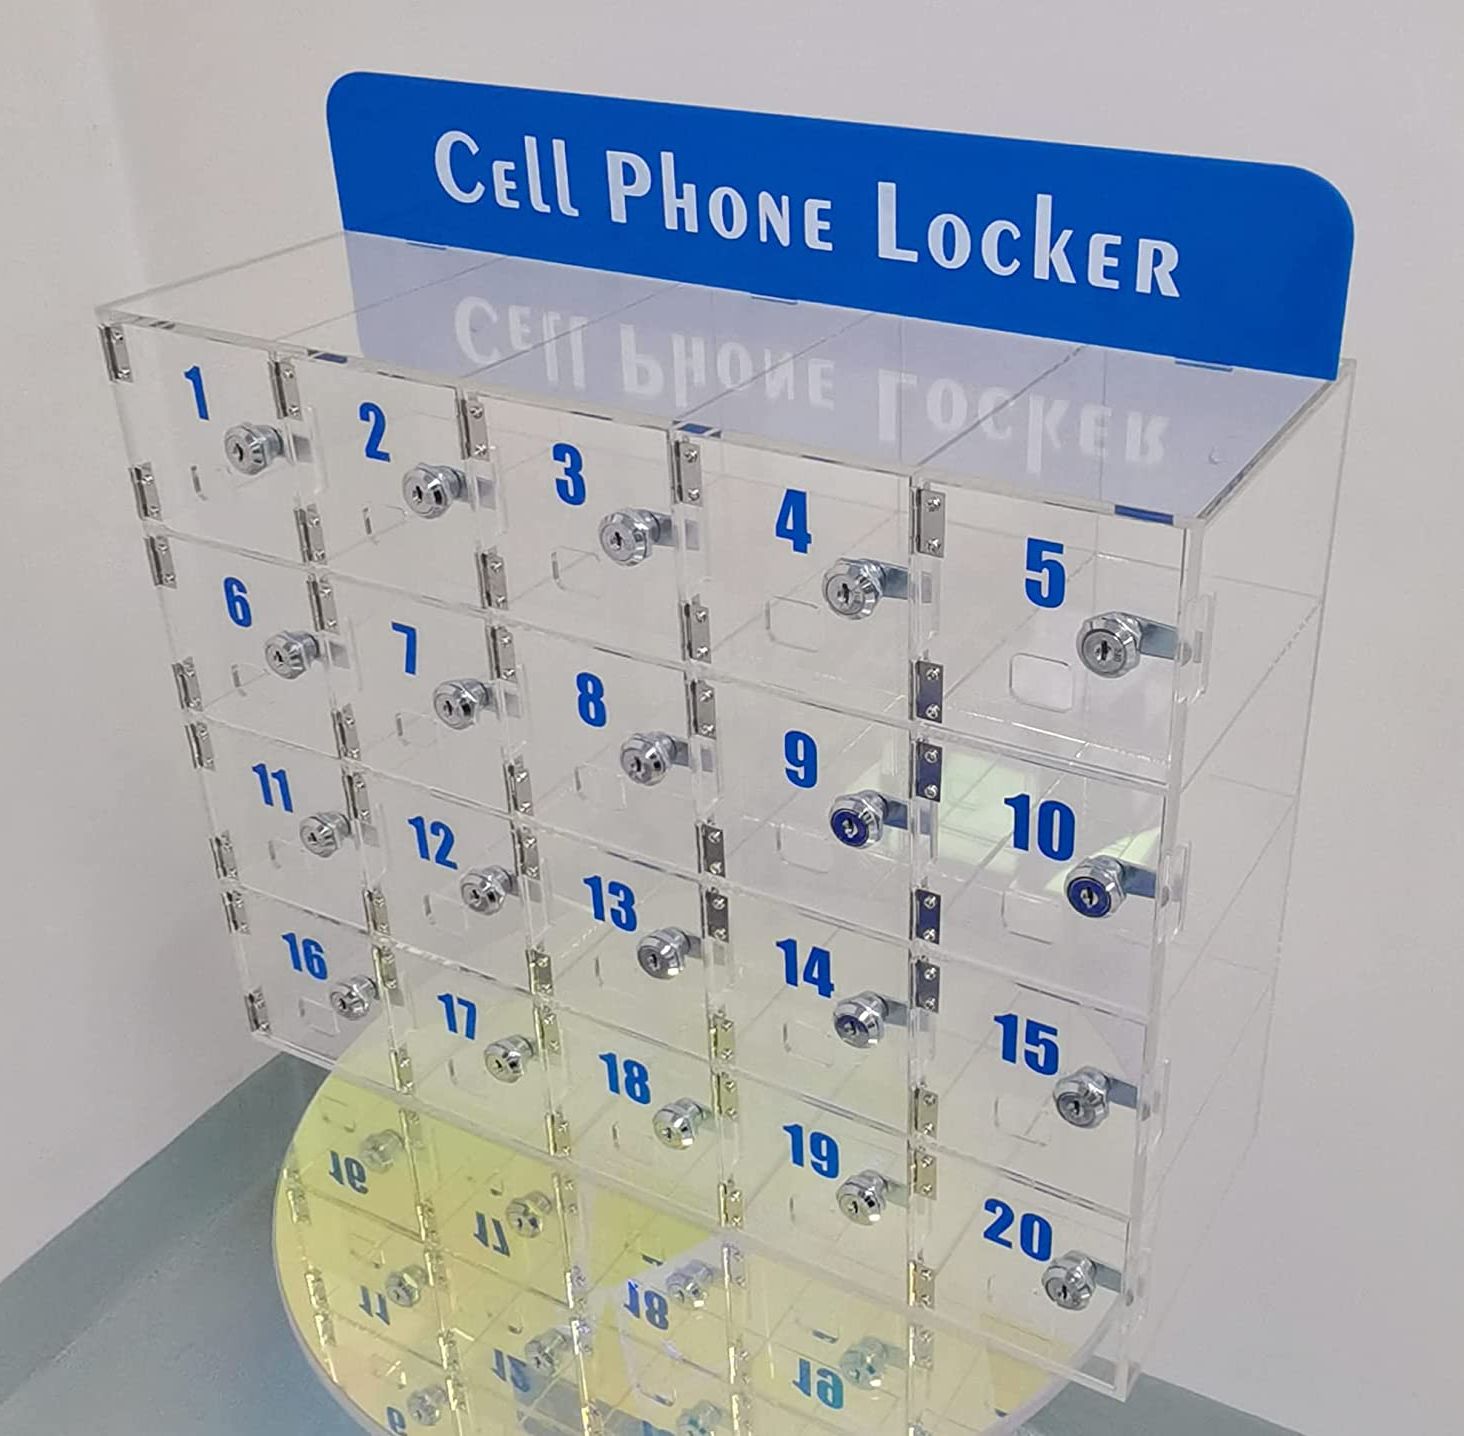 Cell Phone Locker with clear locking compartments to help manage cell phones in class